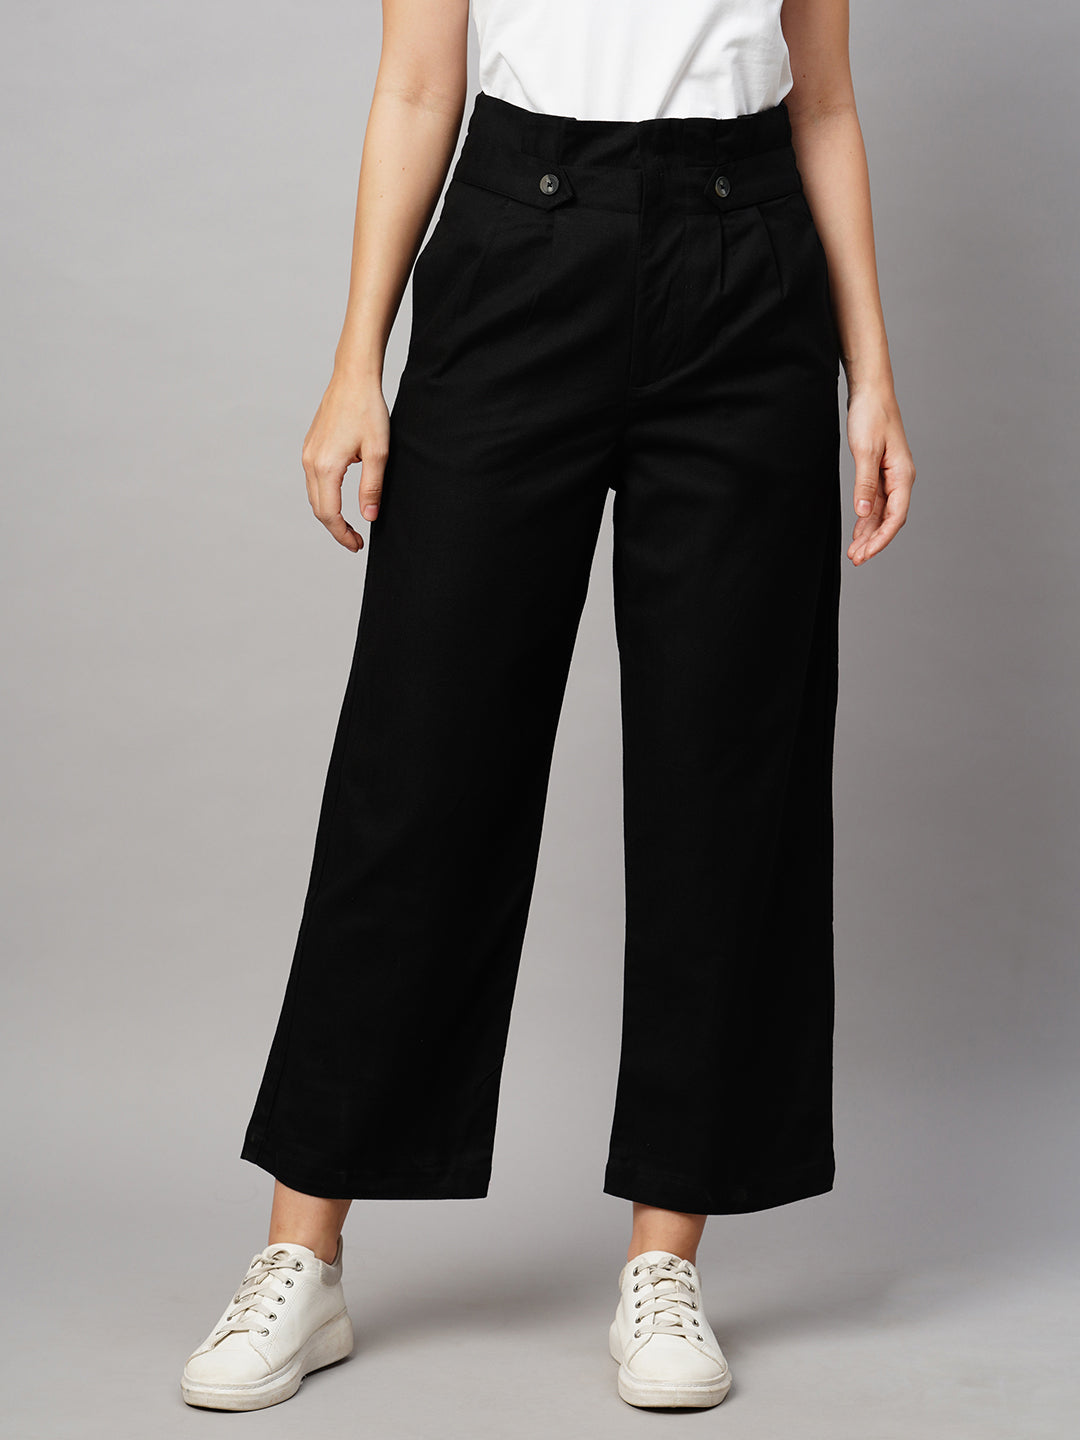 Tokyo Talkies Women Black Tapered Fit Pleated Trousers Price in India Full  Specifications  Offers  DTashioncom